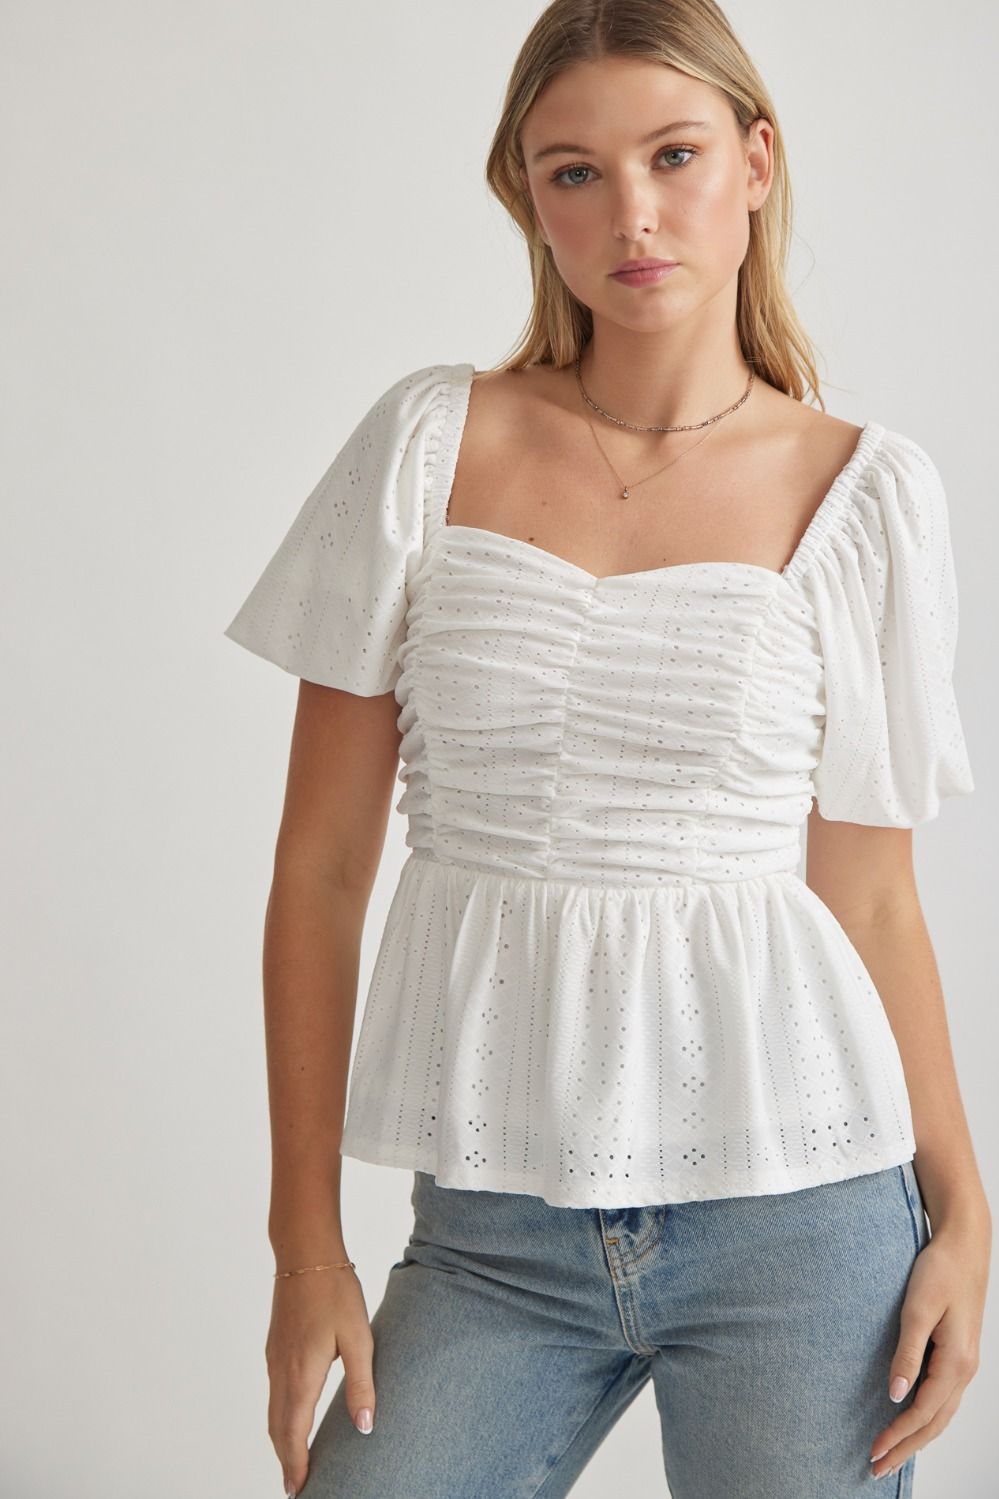 Elevate your wardrobe with our Springtime Sip Top! This eyelet sweetheart neckline top features delicate puff sleeves and ruching at the front, giving it a romantic and elegant look. The smocked back and lining provide a comfortable, flattering fit. Made with high-quality woven fabric, this top is non-sheer and perfect for any occasion. Transform your outfit with this must-have piece!